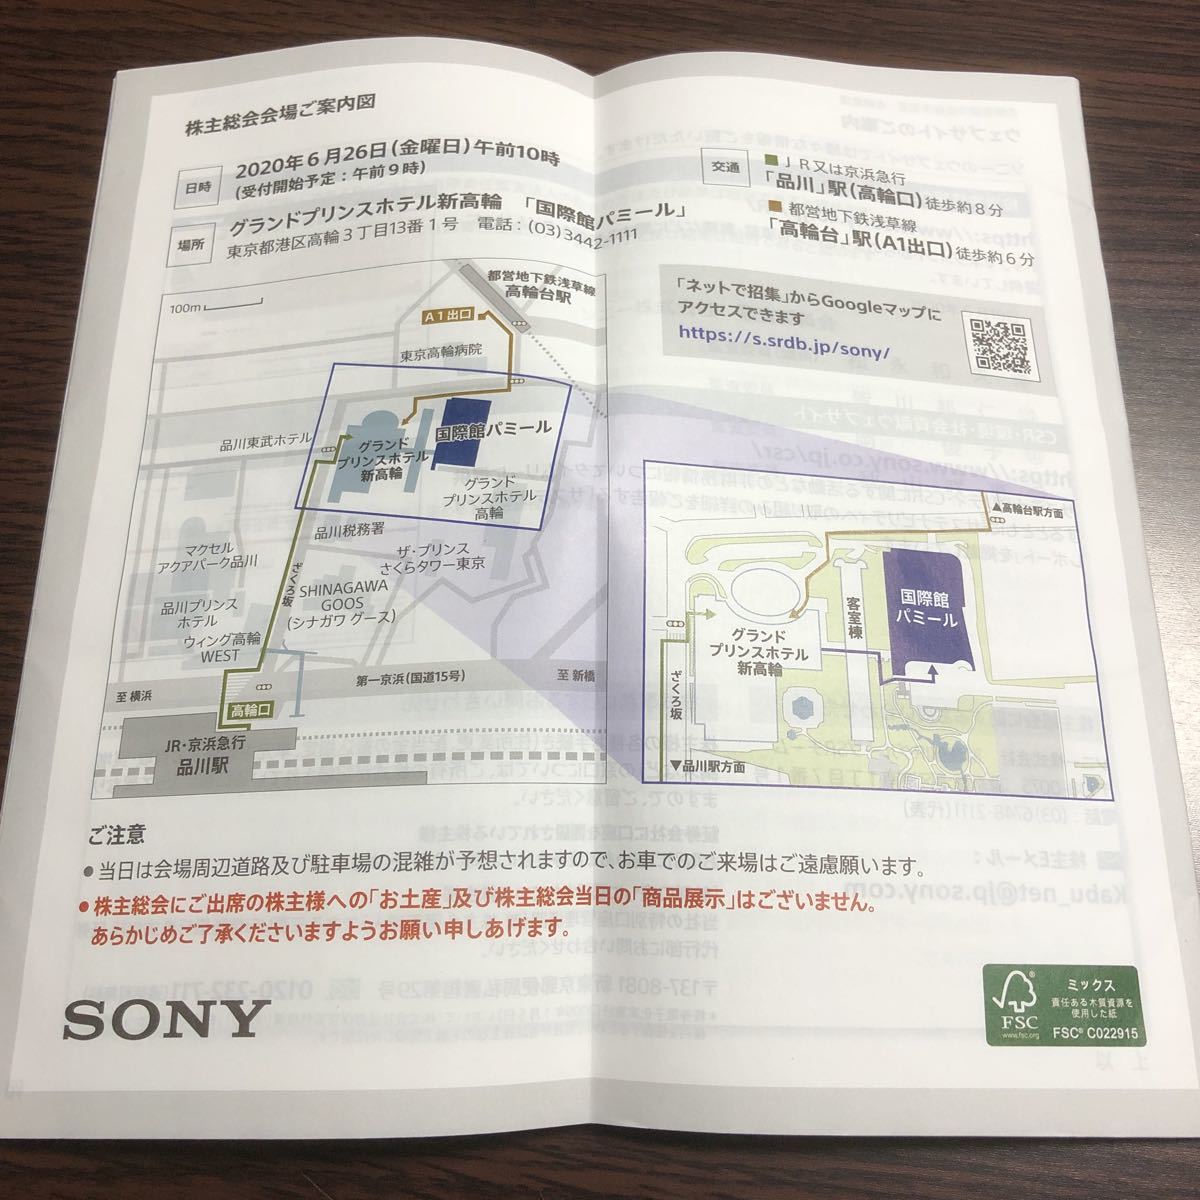 [ stockholder total .] Sony SONY 2020. peace 2 year no. 103 times . compilation notification project report enterprise information finding employment action .. job changing new . middle . company four season . PlayStation PS 4 5